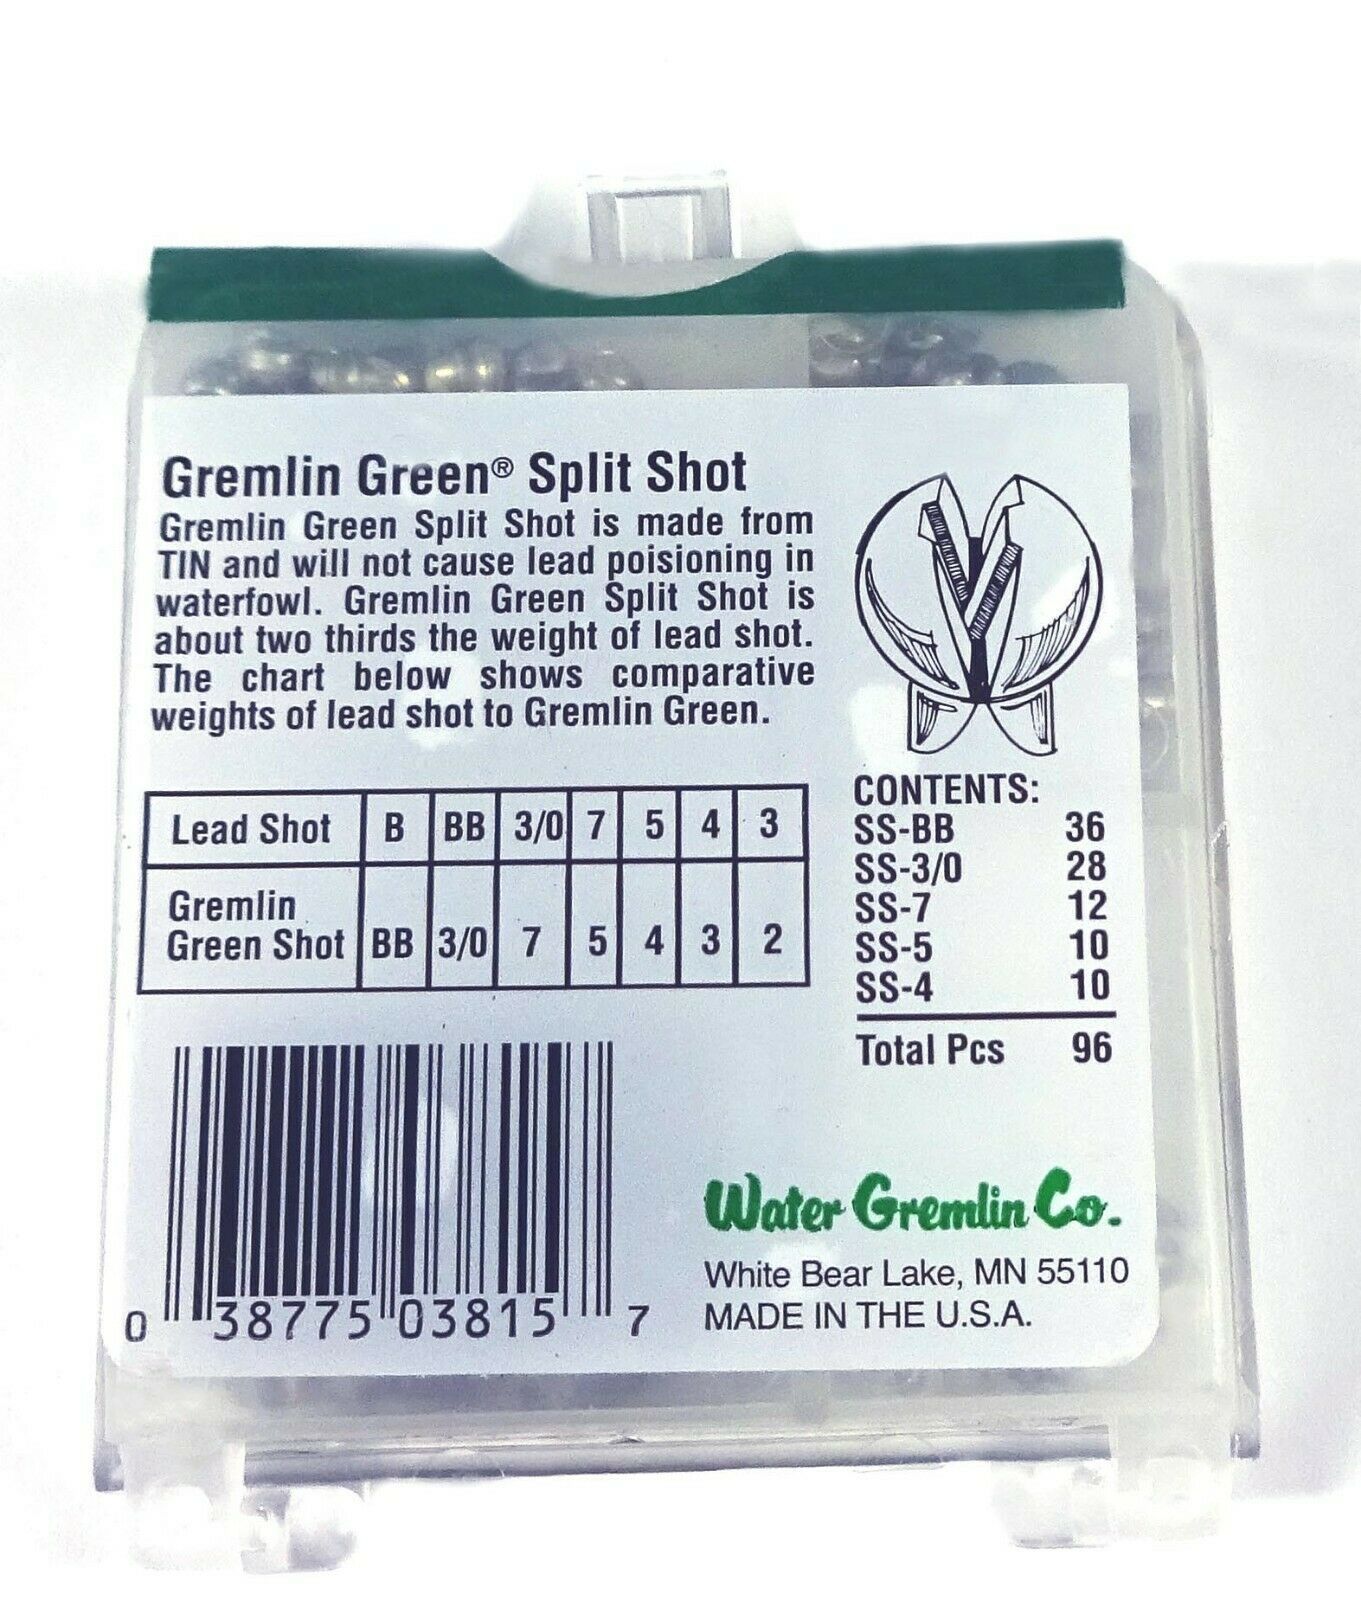 Water Gremlin's Green/Tin Removable Split Shot Pro Pack, #zss Pro, 96 Pieces